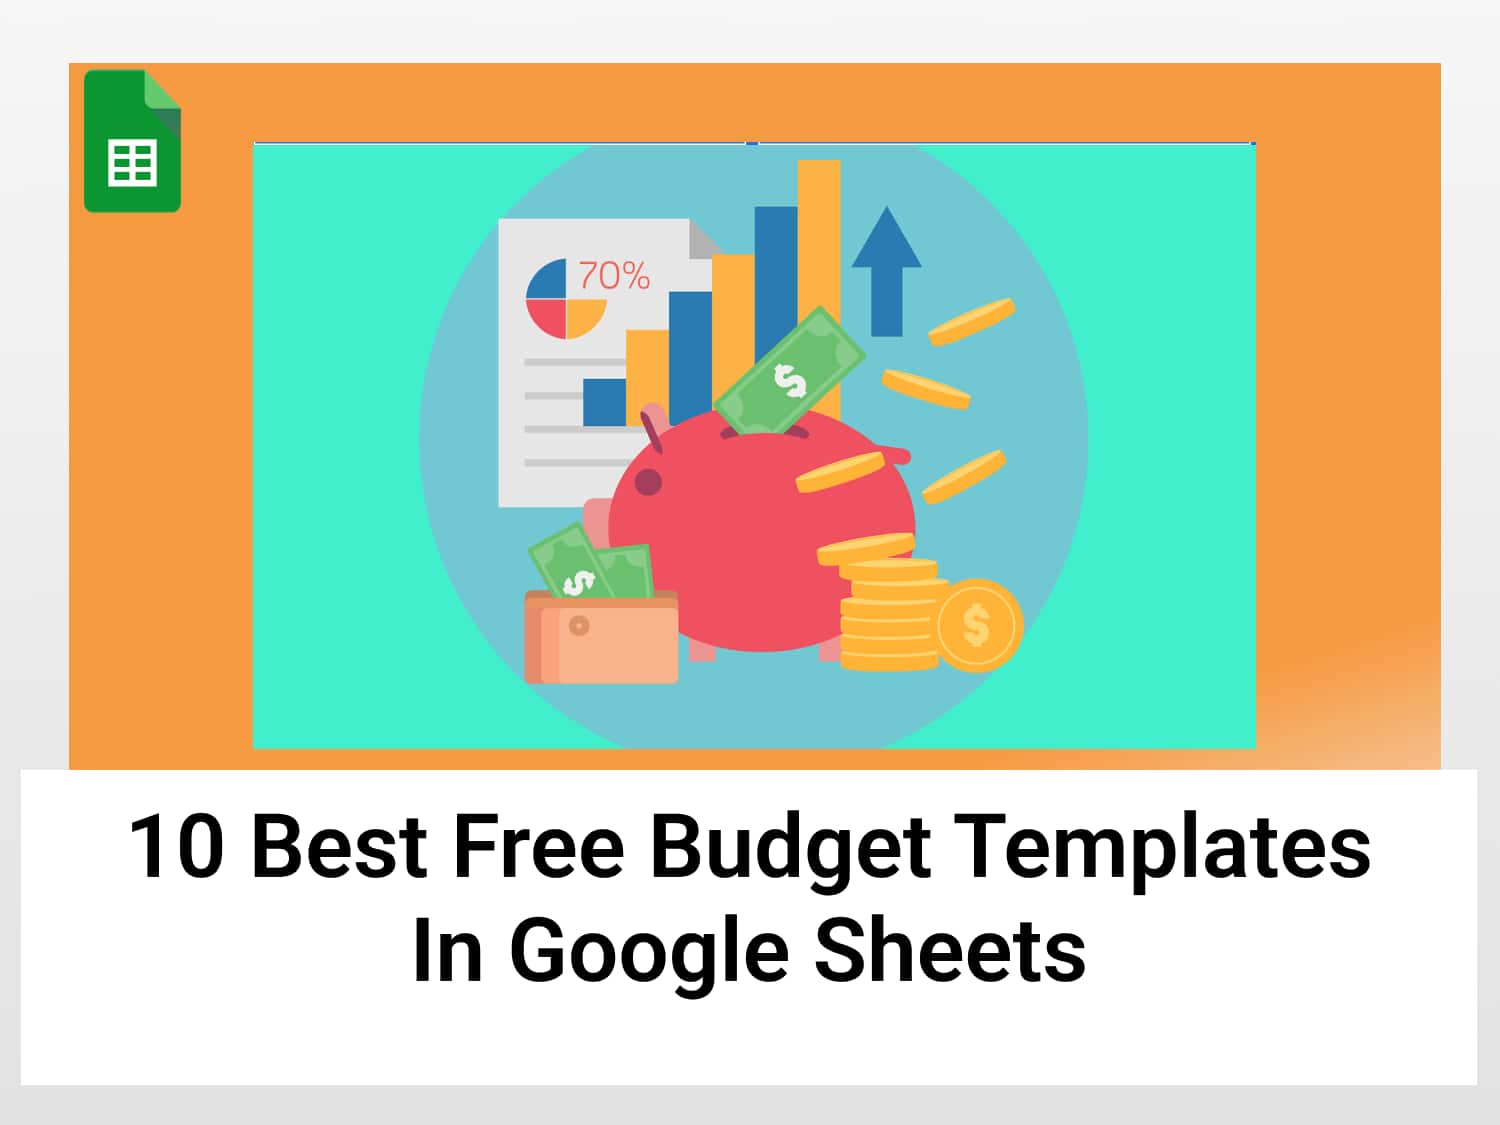 10 best free budget templates in Google Sheets